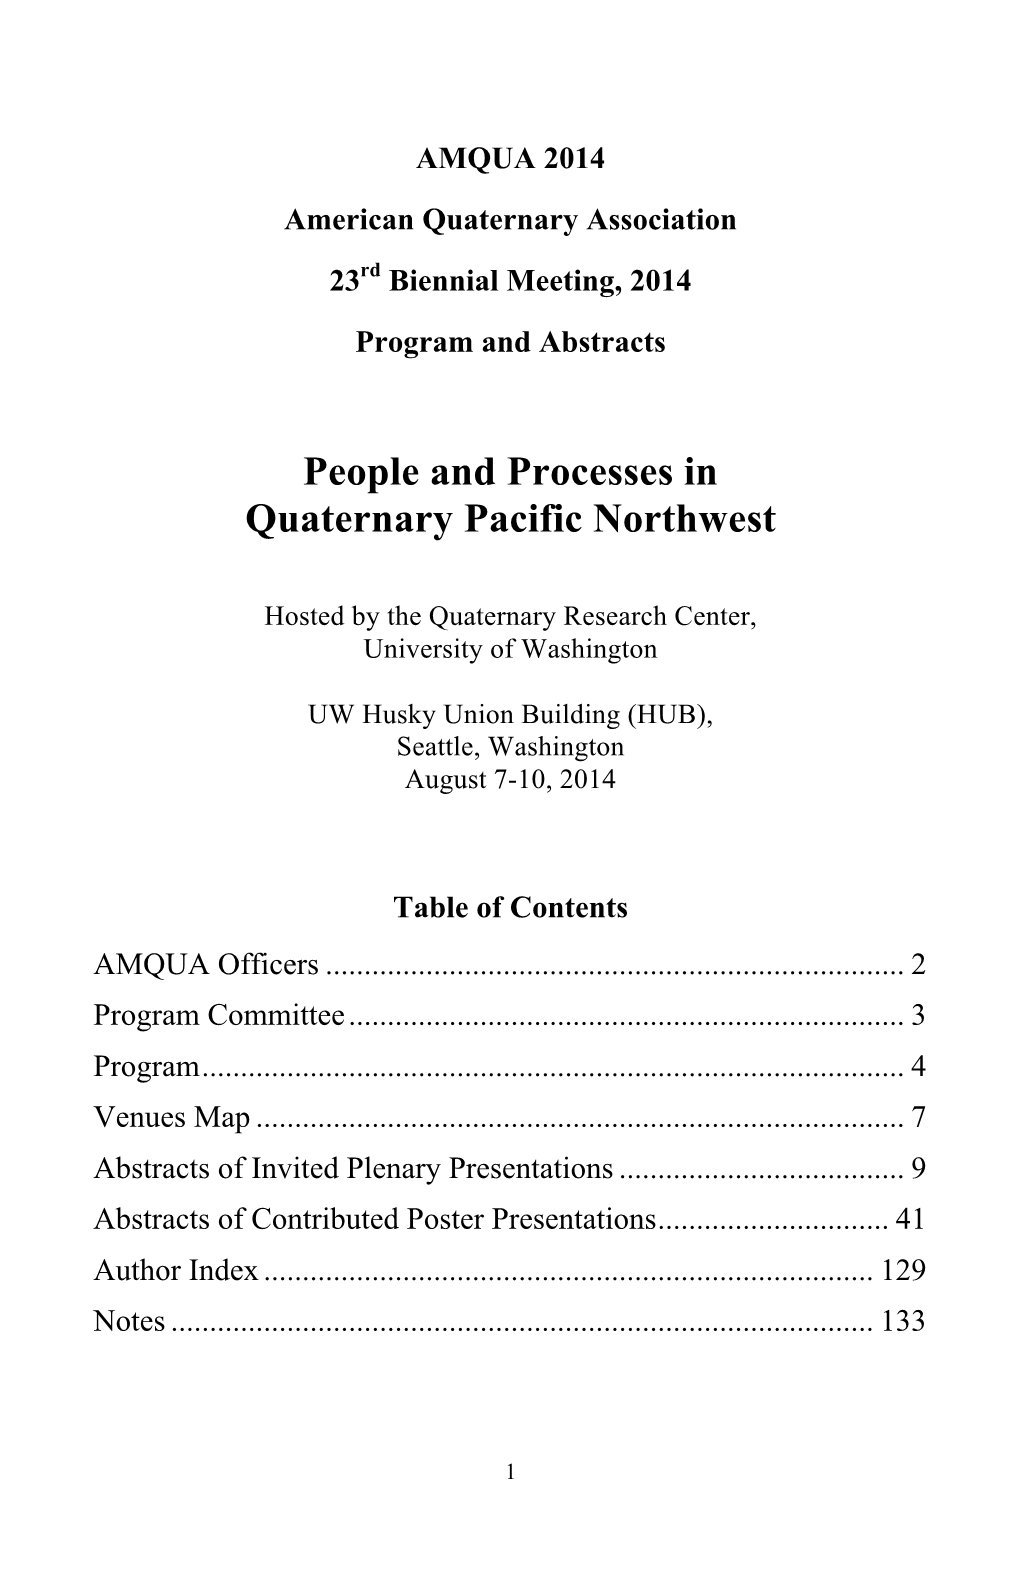 People and Processes in Quaternary Pacific Northwest